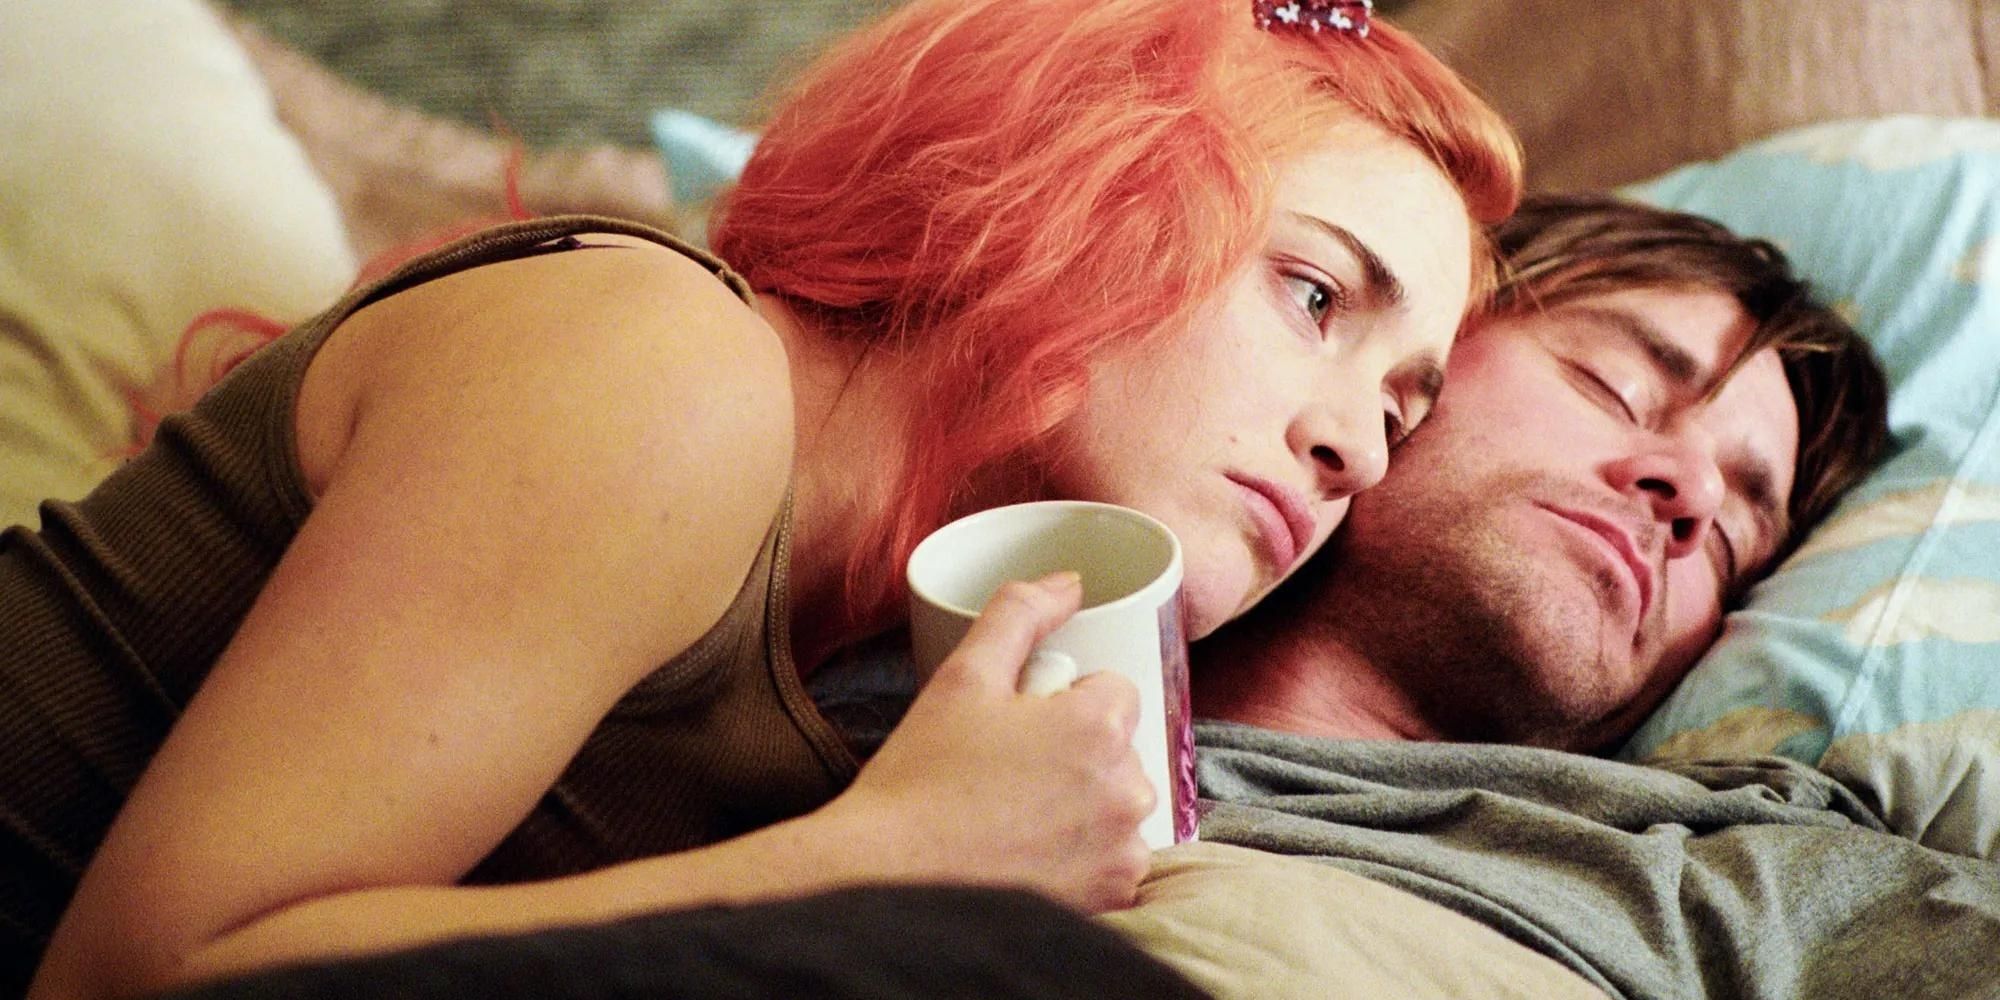 Joel and Clementine in bed together in Eternal Sunshine of the Spotless Mind